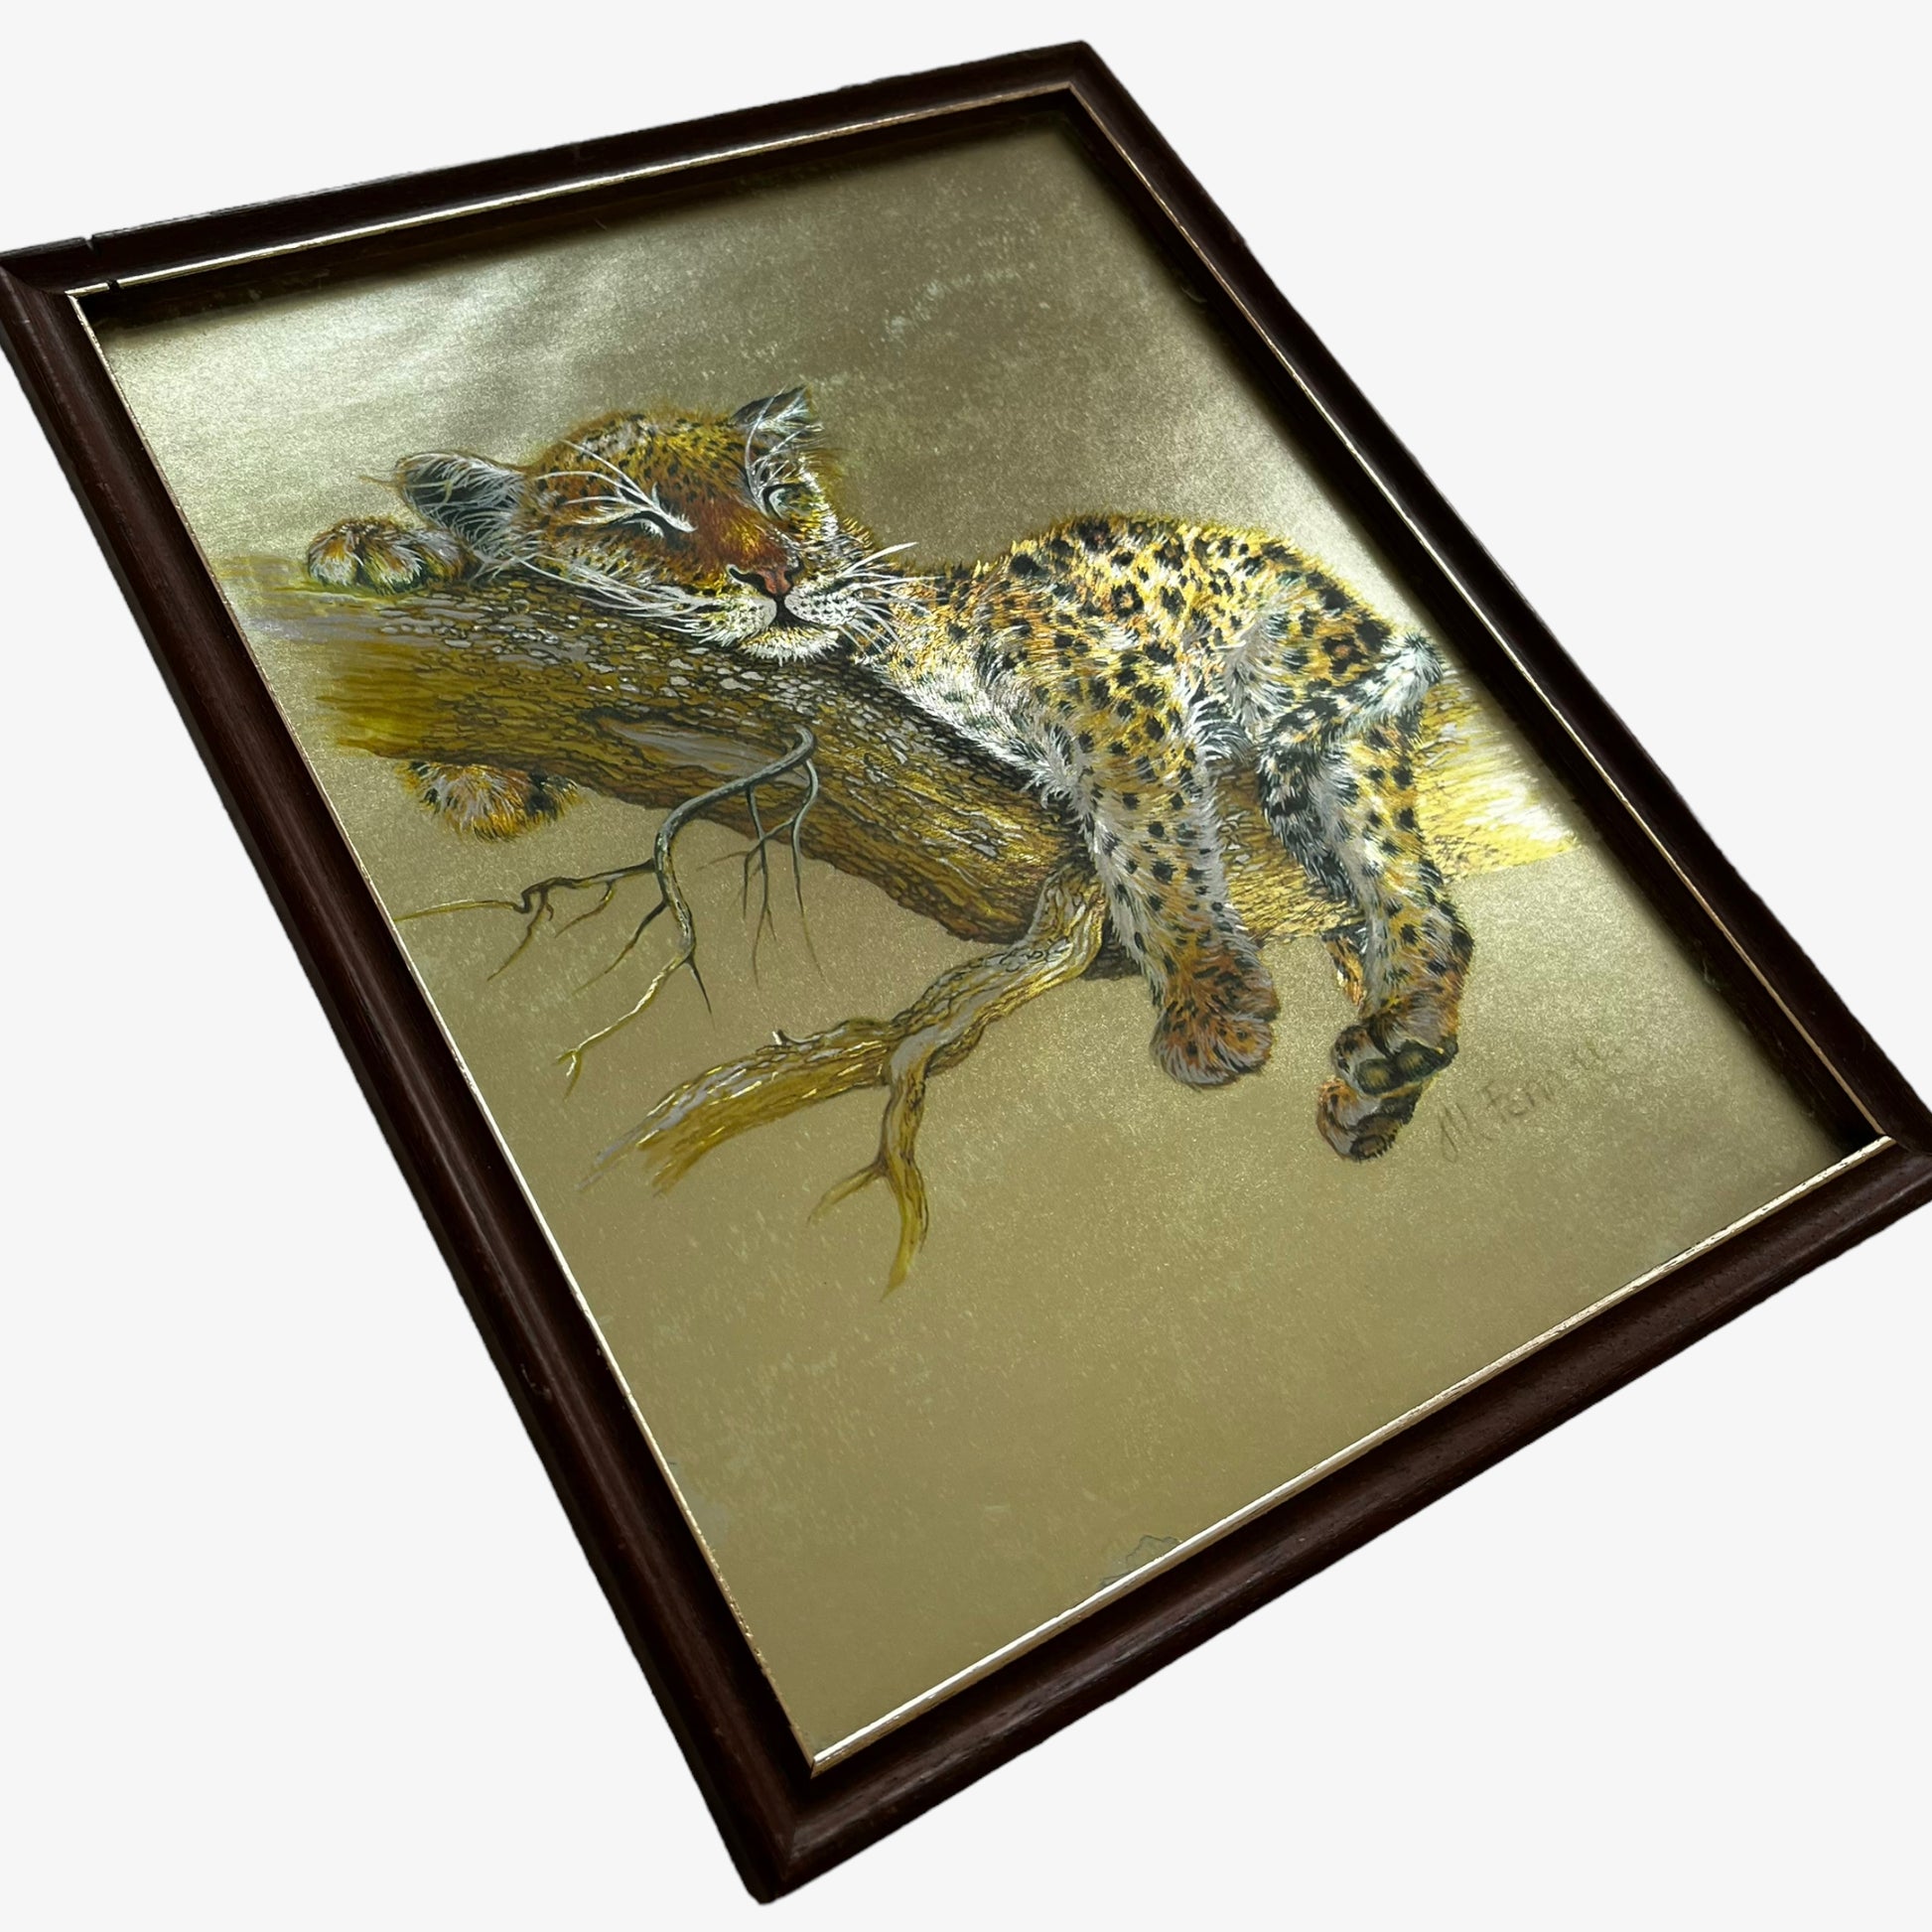 Vintage 80s Framed Leopard Cub Foil Art Etching By M. Fennell Bright - Casspios Dream